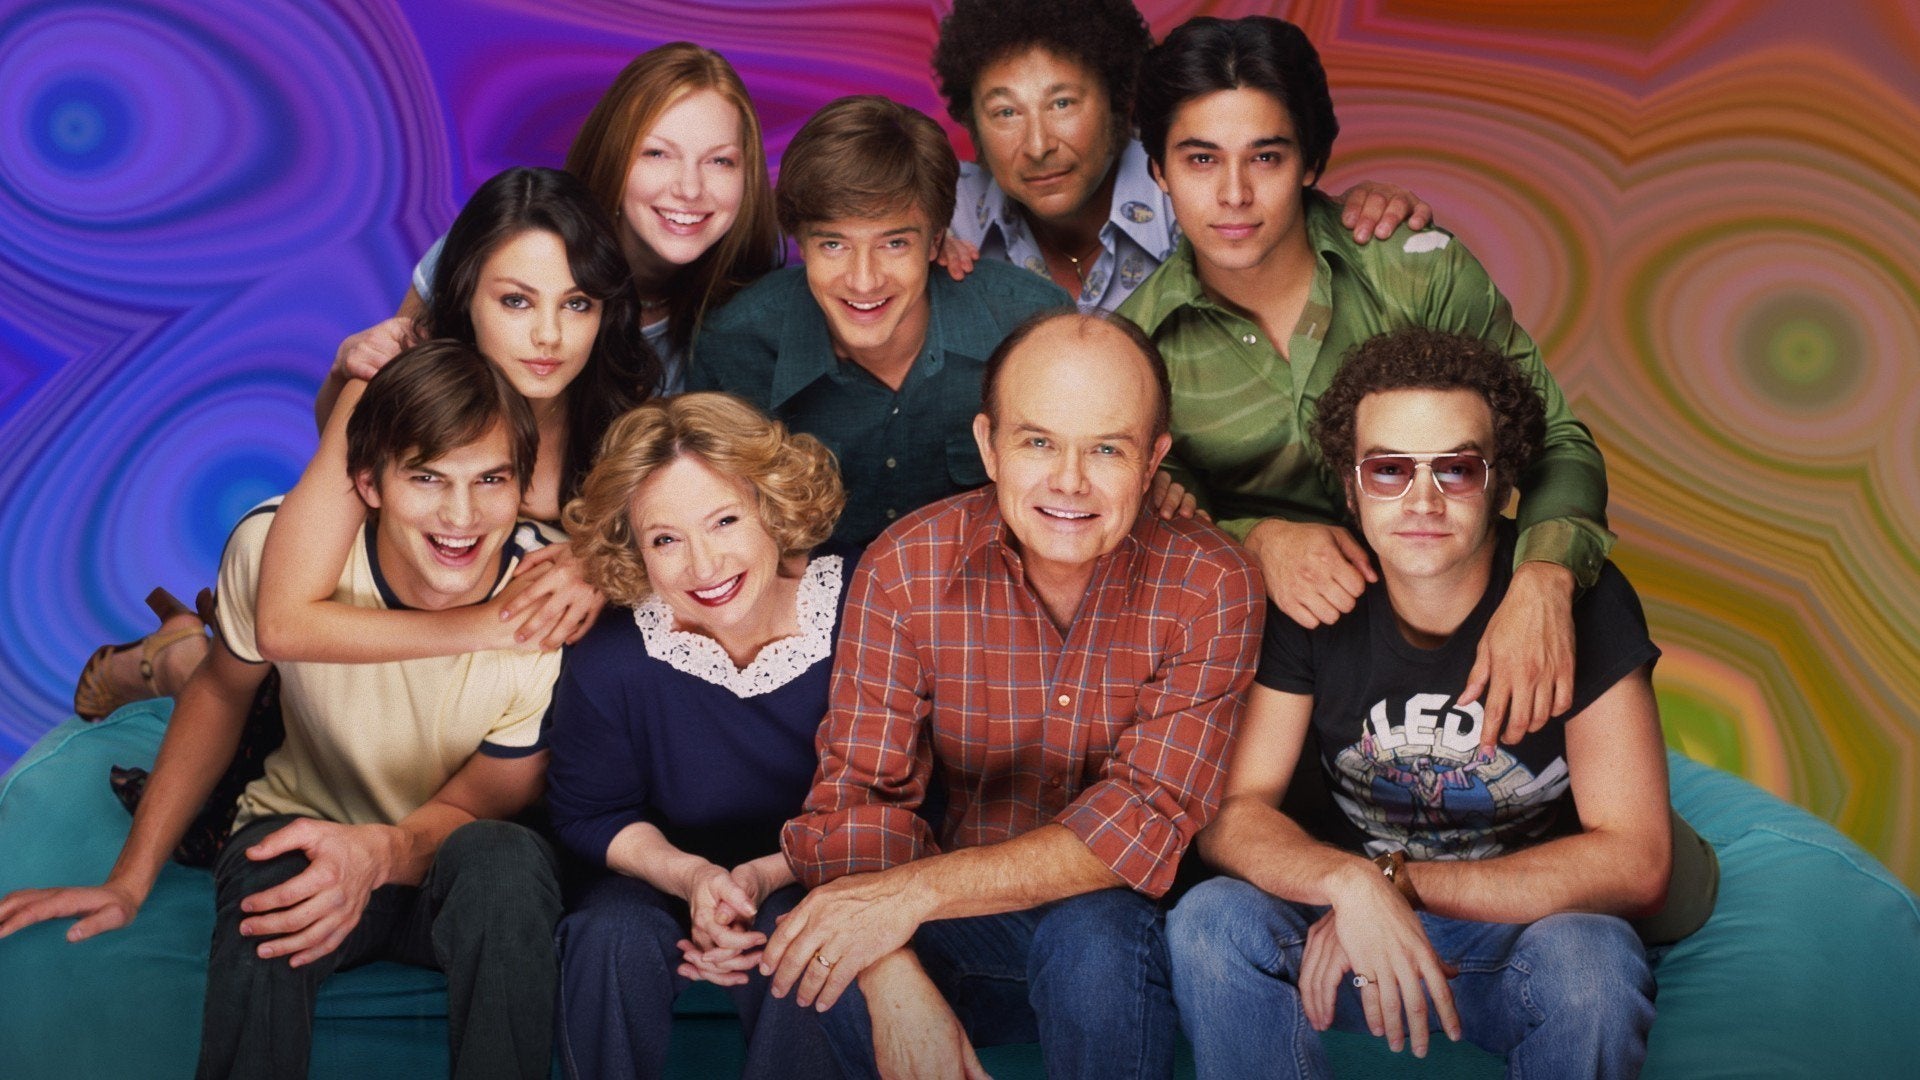 That '70s Show: The Complete Series - Seasons 1-8